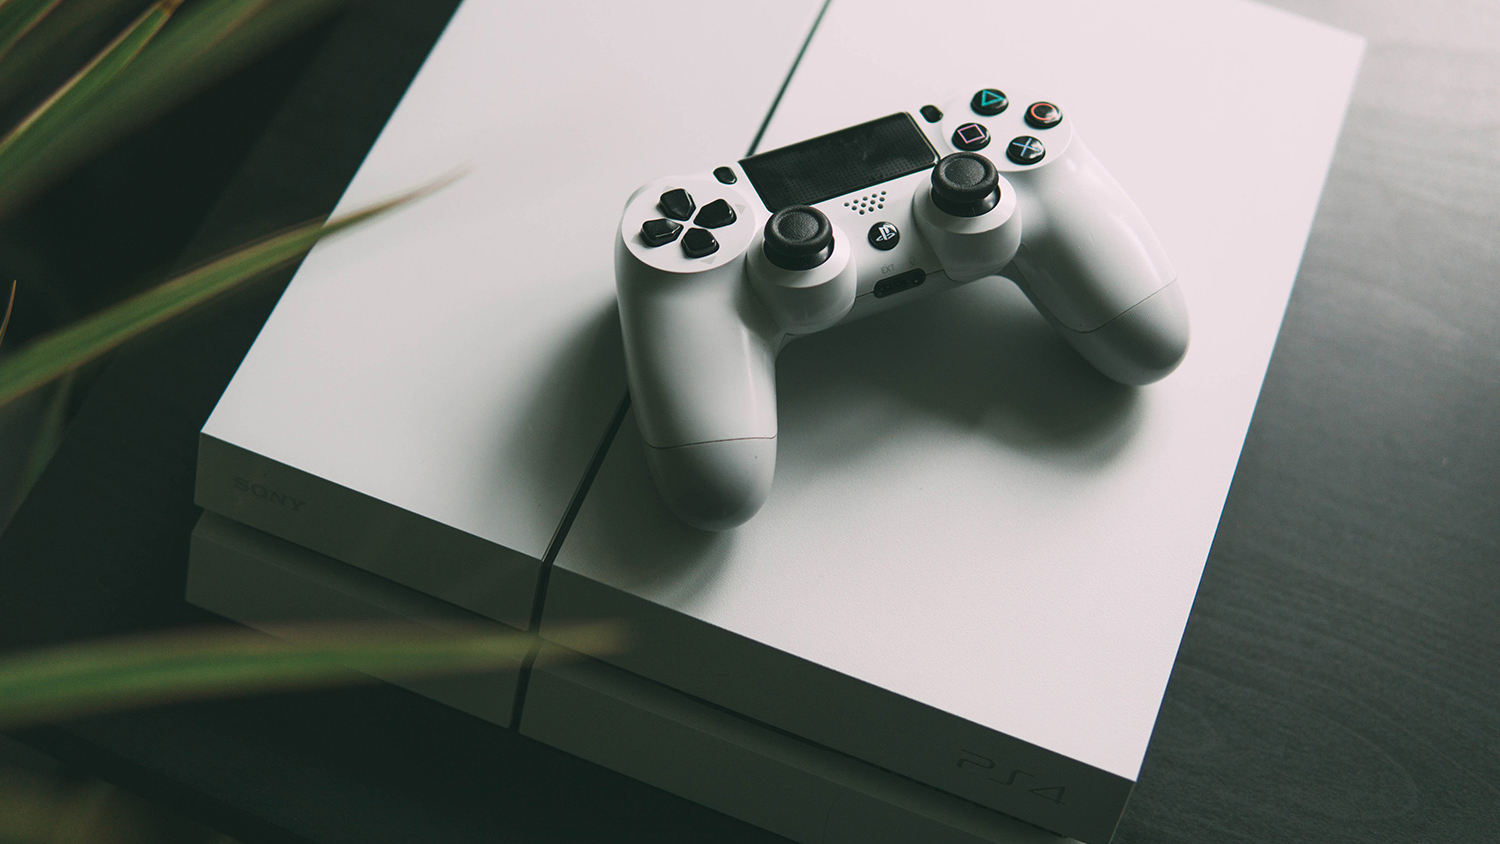 https://www.digitaltrends.com/wp-content/uploads/2017/11/best-ps4-games-white-playstation-4-console.jpg?fit=1500%2C844&p=1